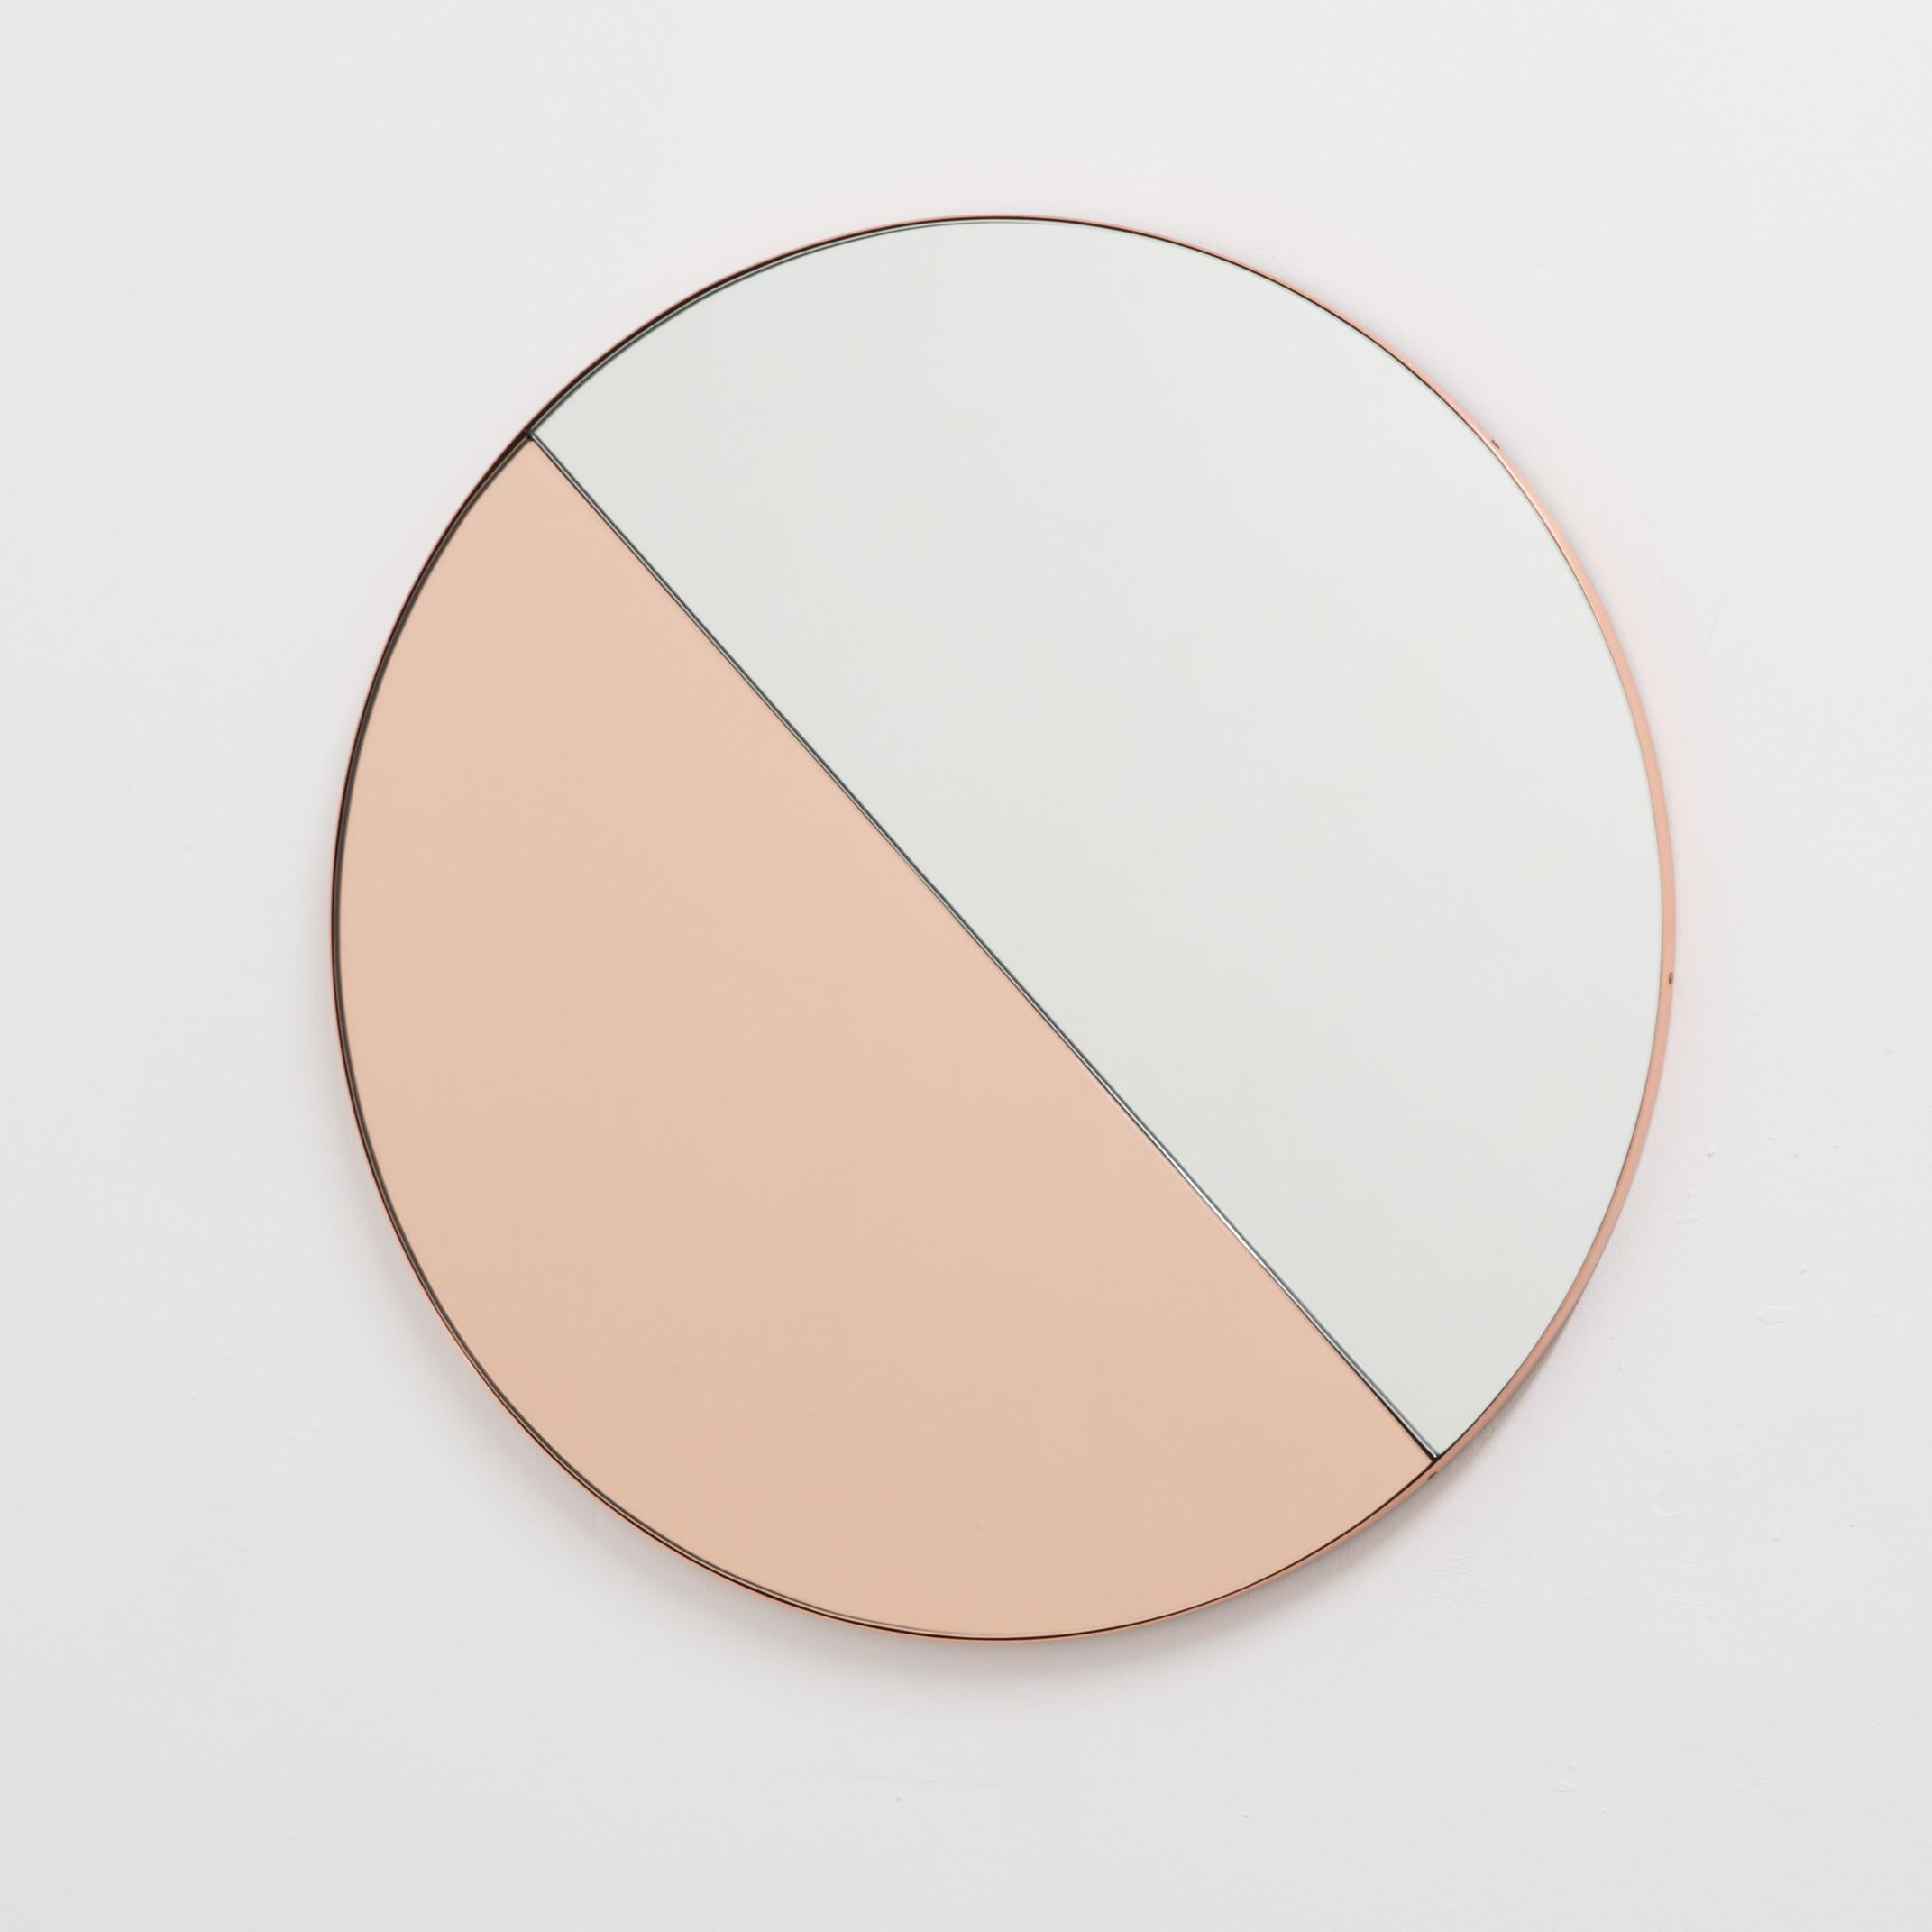 In Stock Orbis Dualis Peach Silver Round Mirror with Copper Frame, Medium For Sale 6